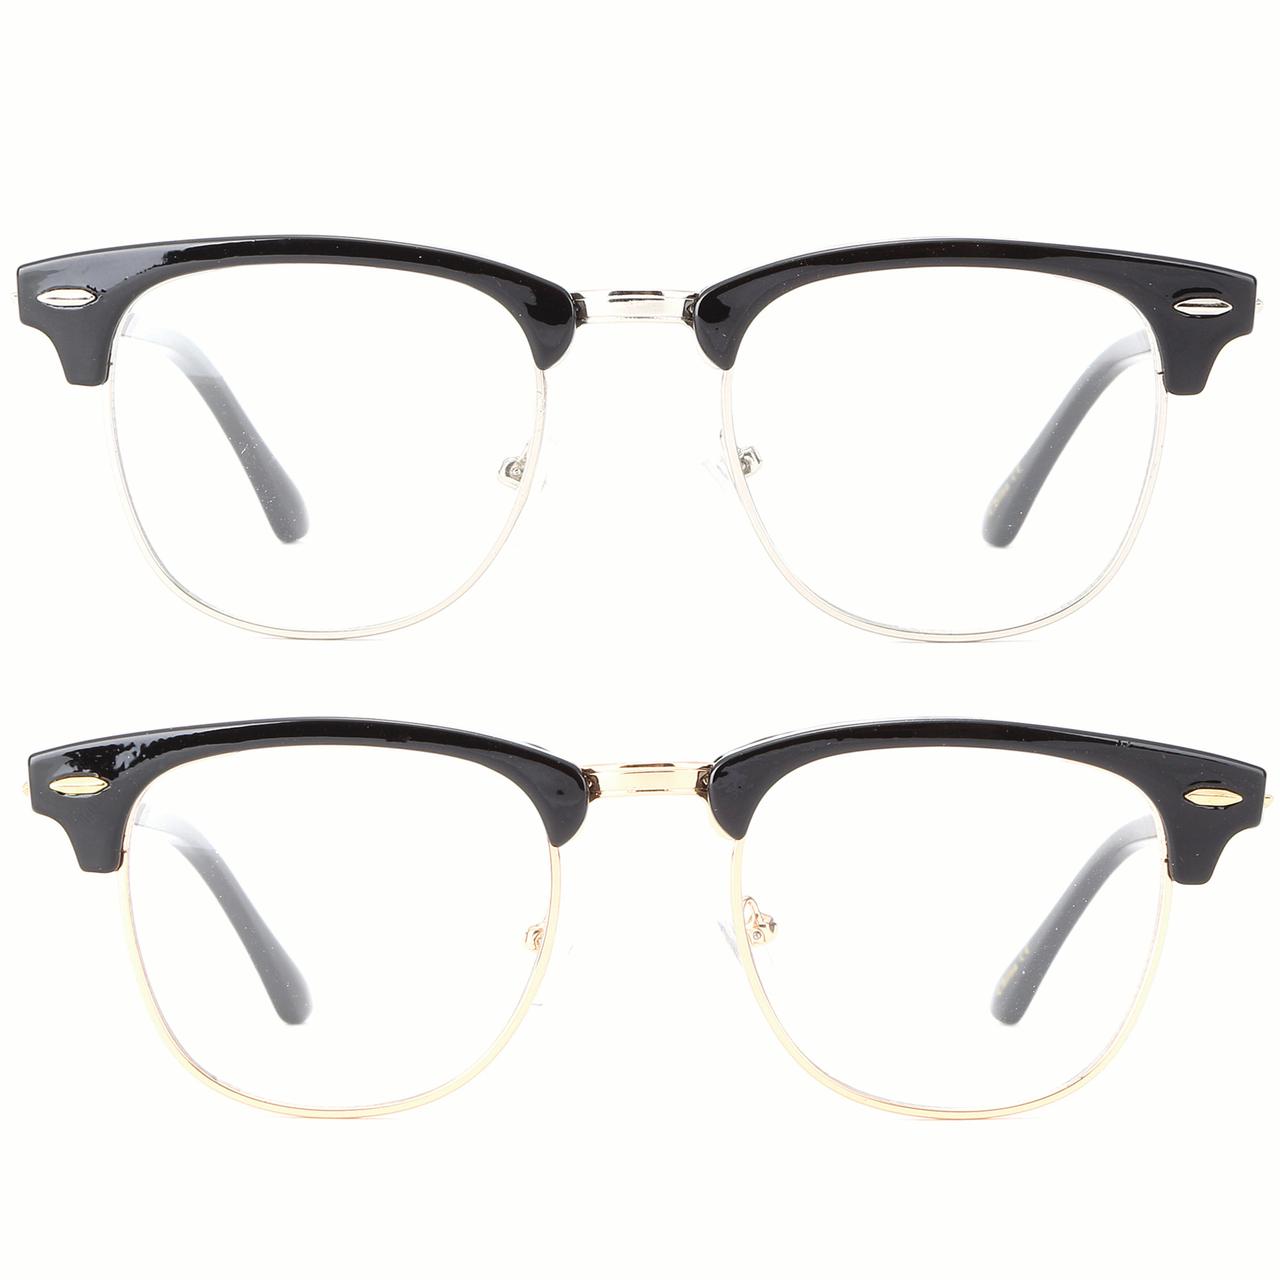 2 Pairs Newbee Fashion - Vintage Oval Stylish Retro Celebrity Classic Half Frame High Fashion Clear Lens Glasses - image 1 of 1